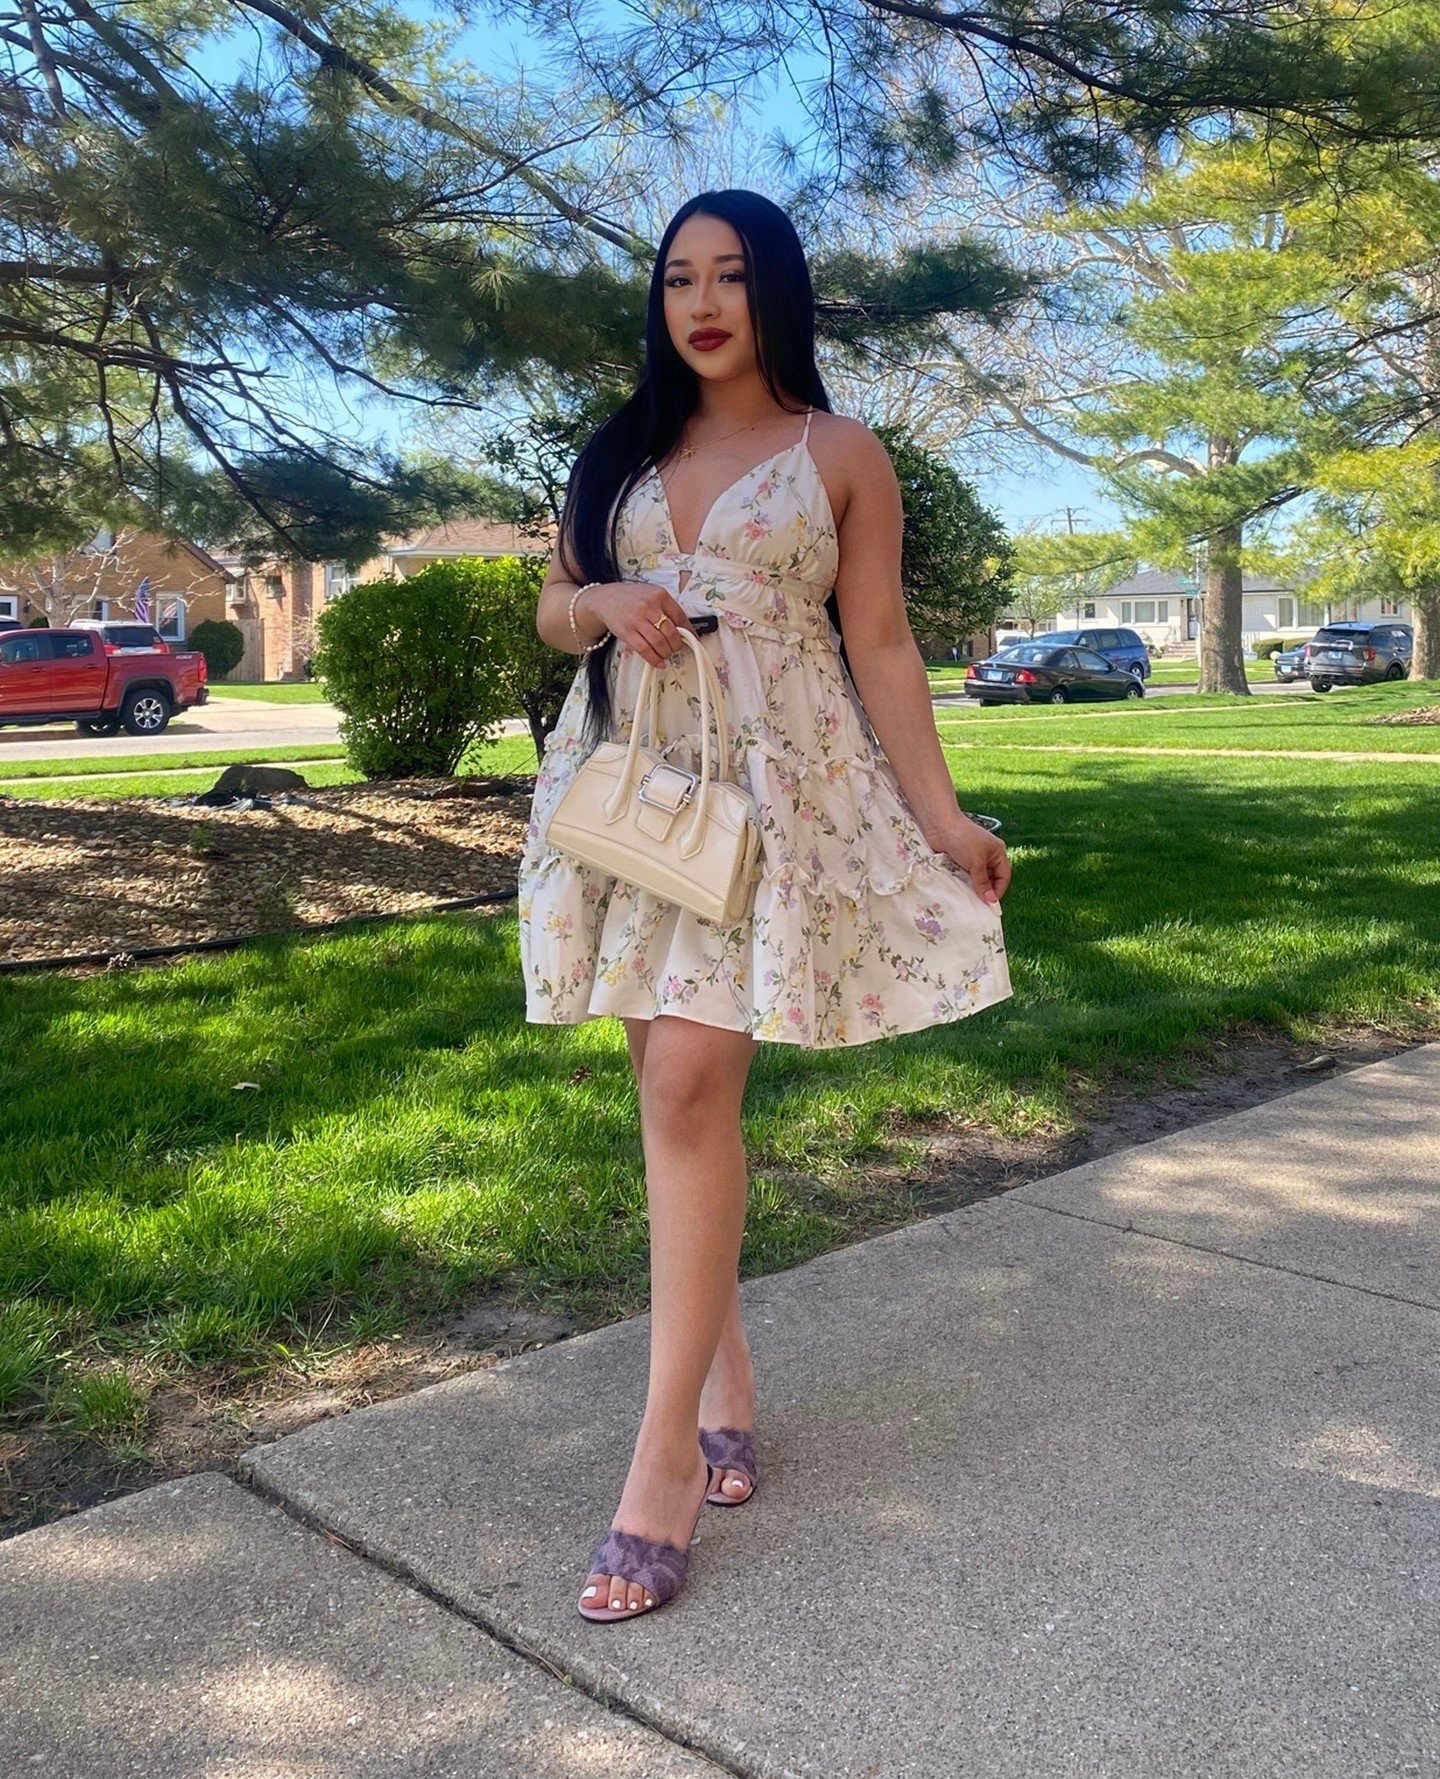 All the dreamy spring vibes. 💐 Beauty, @elenastylee wearing our [x]. Tap for outfit details below - shop her style in-store now! ✨ @discoveryclothing⁠
⁠
Print Linen Tierred Halter Dress: #91919 - $17.99⁠